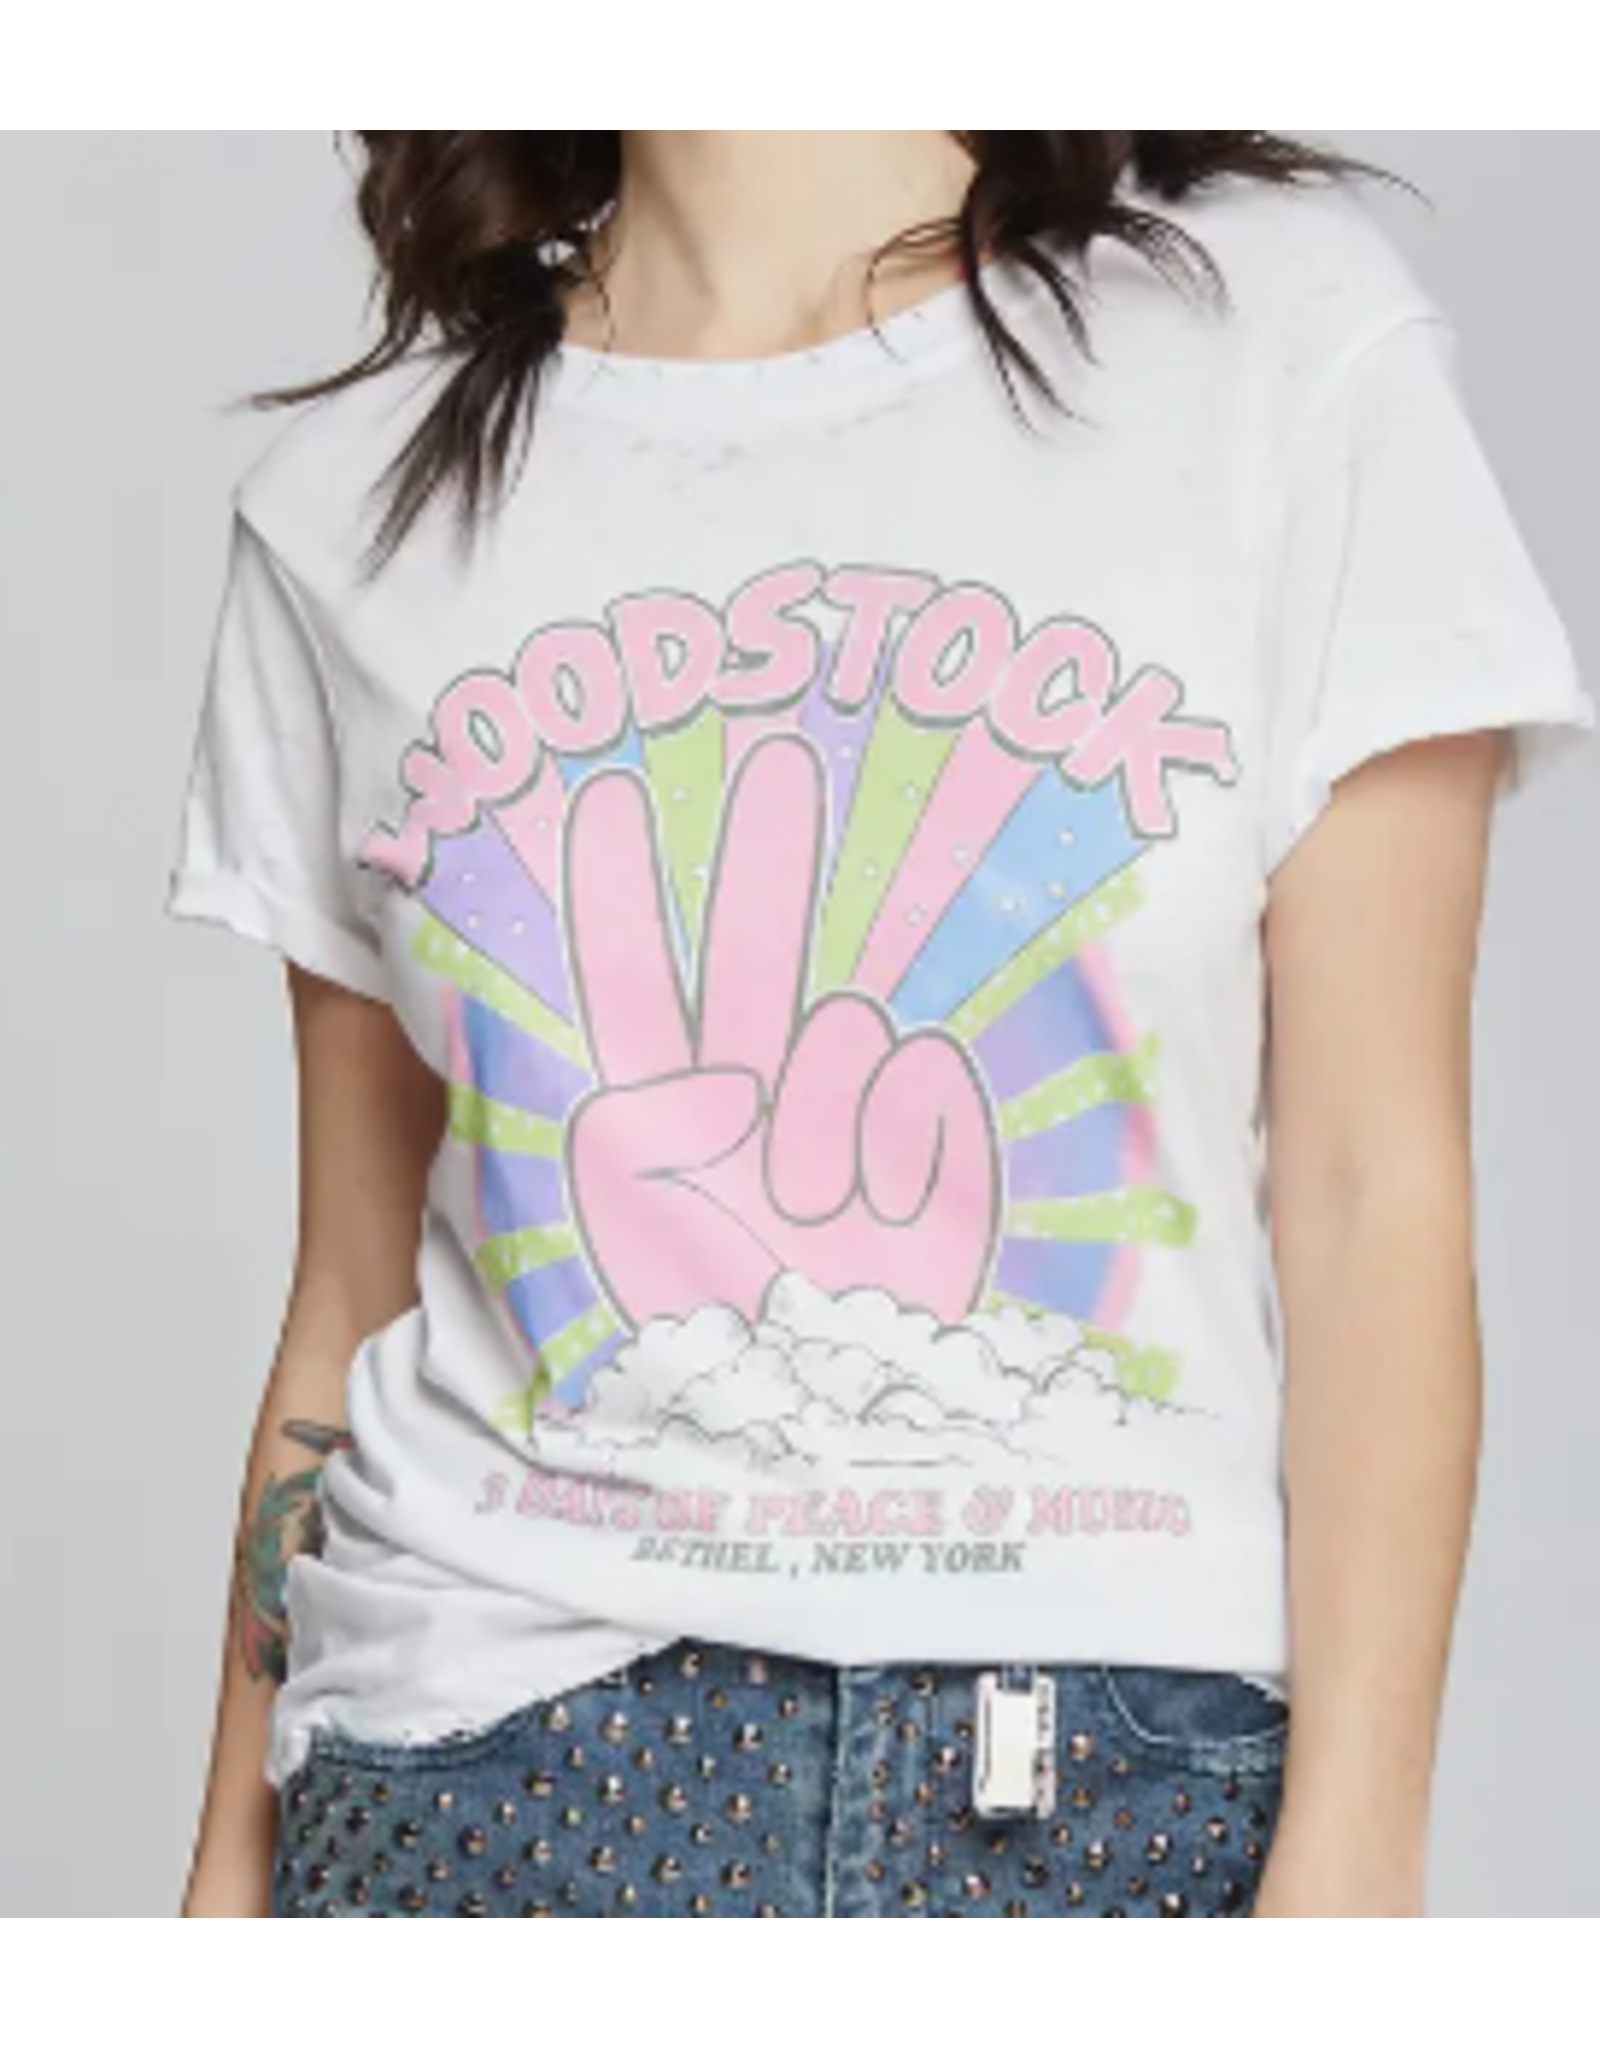 Woodstock 3 Days of Peace Burnout Tee